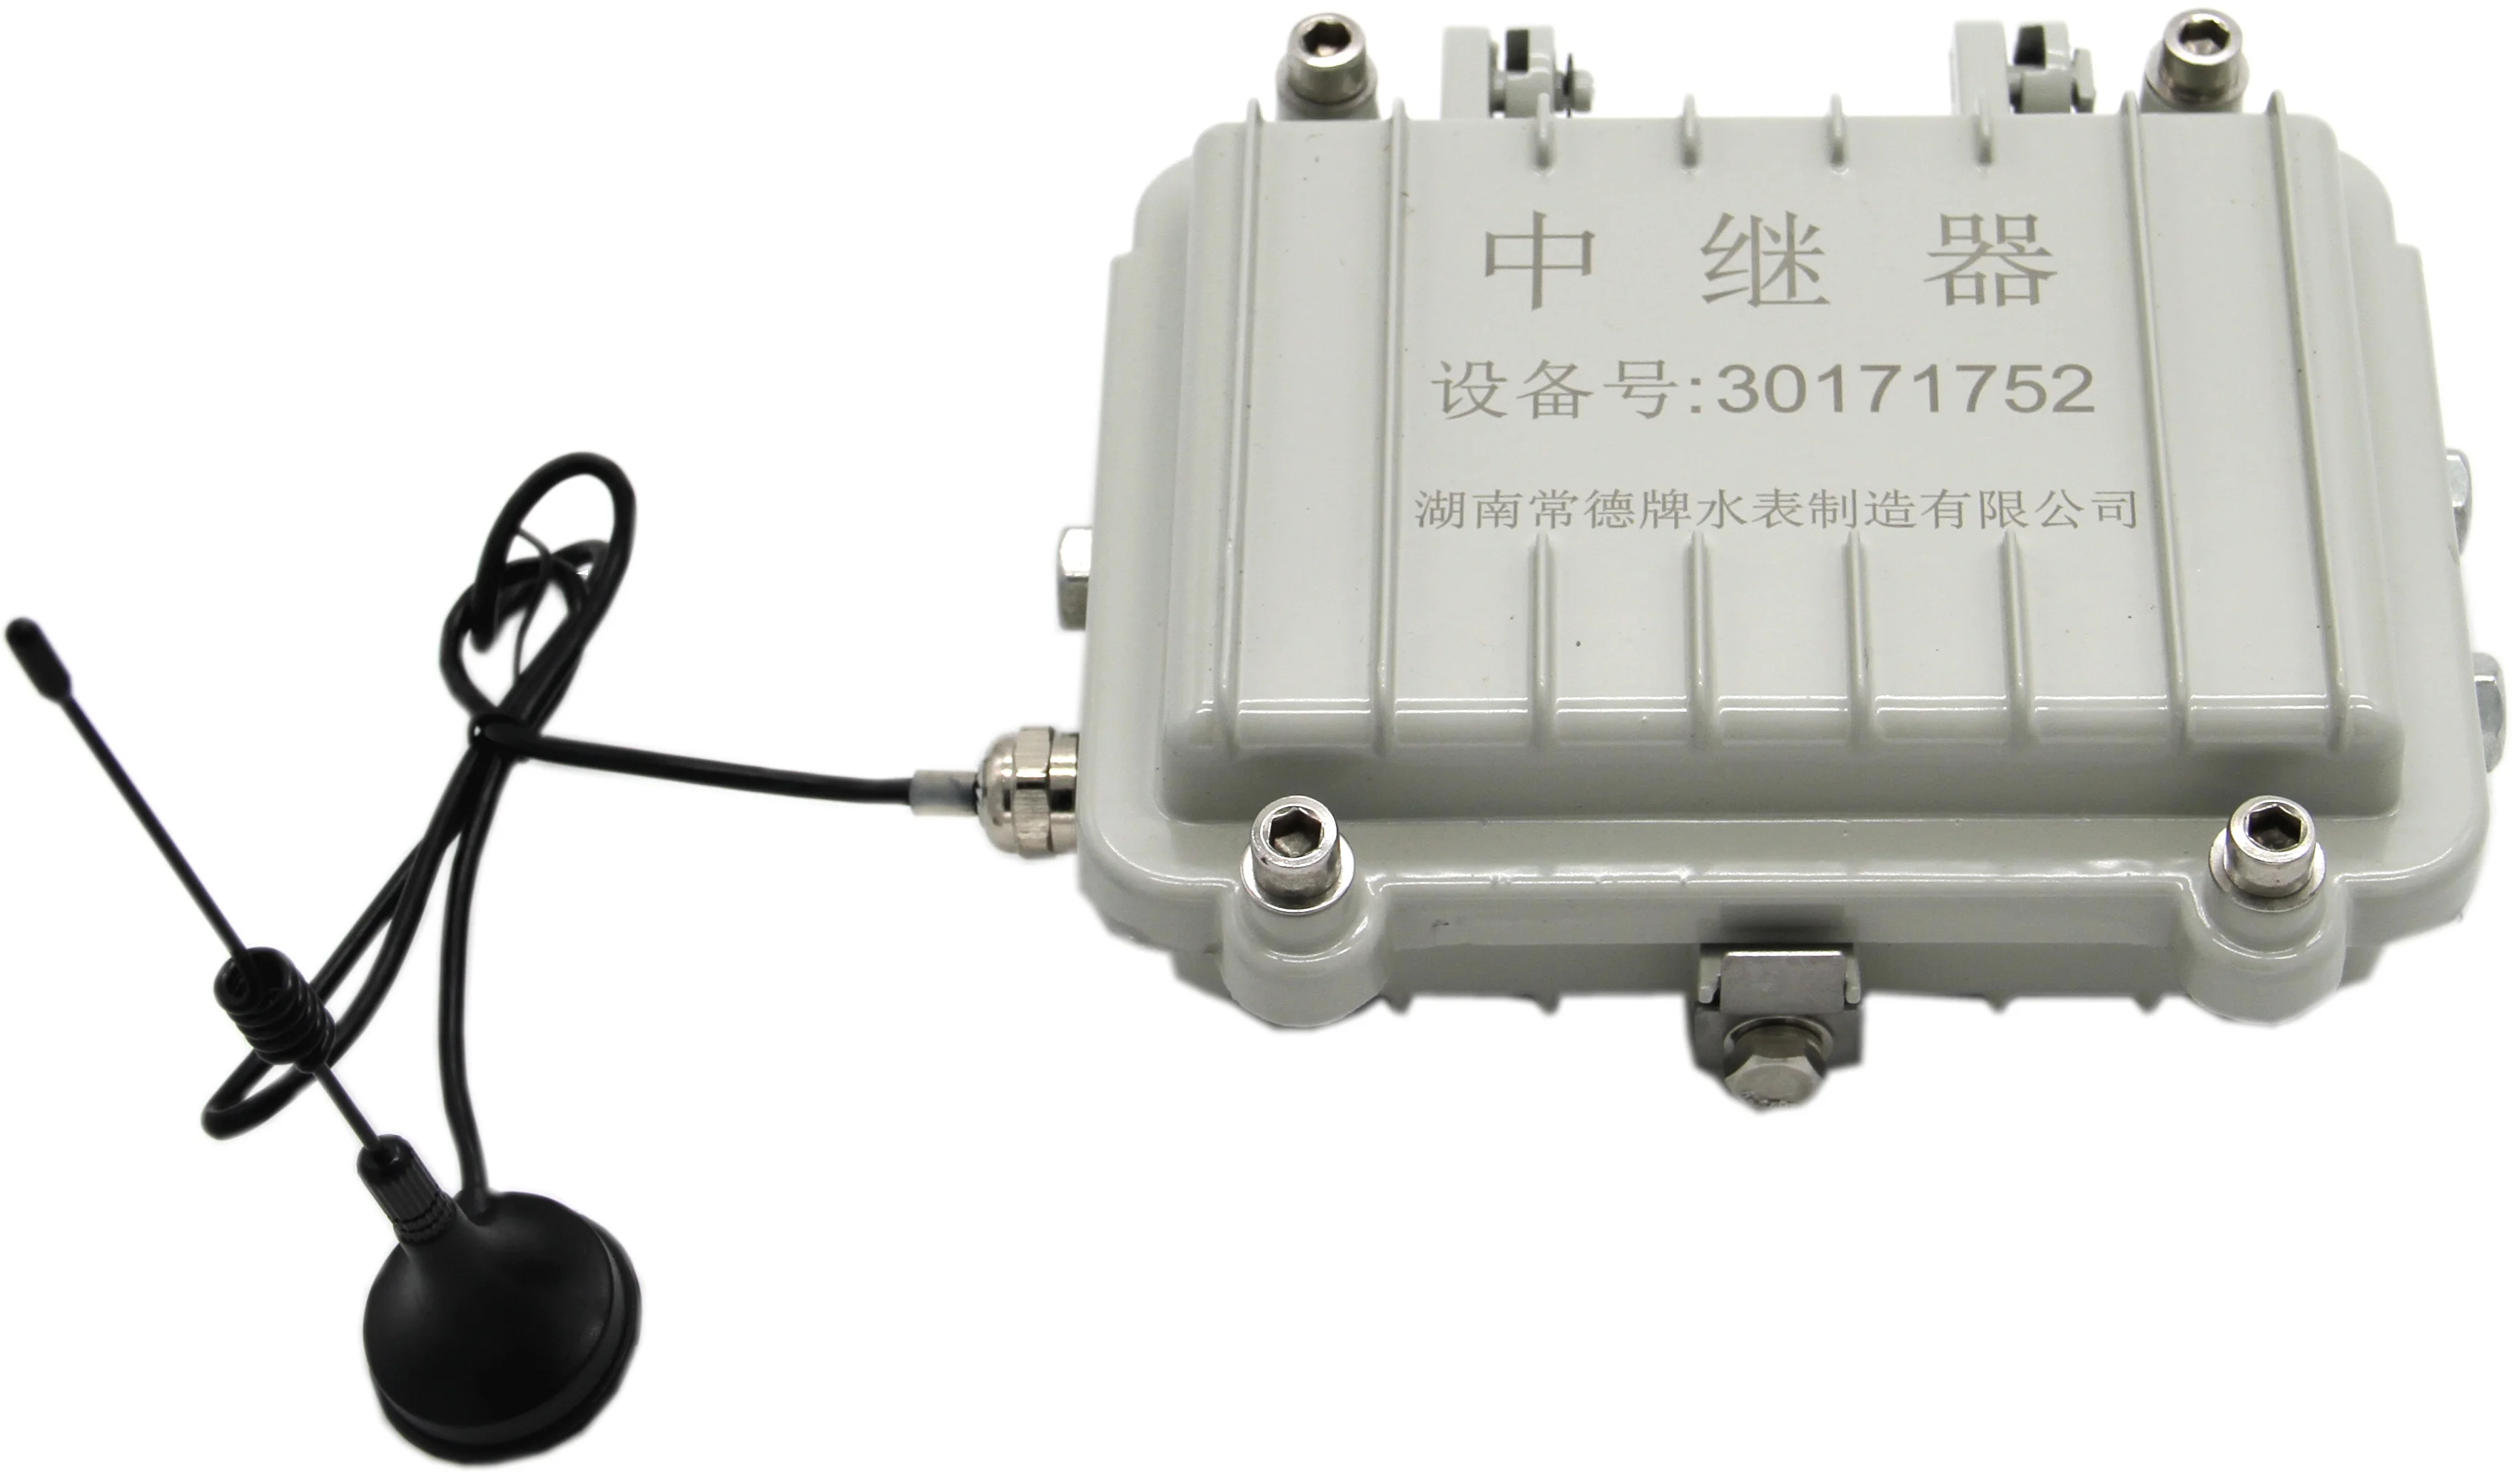 Wireless concentrator and other equipment for water meter